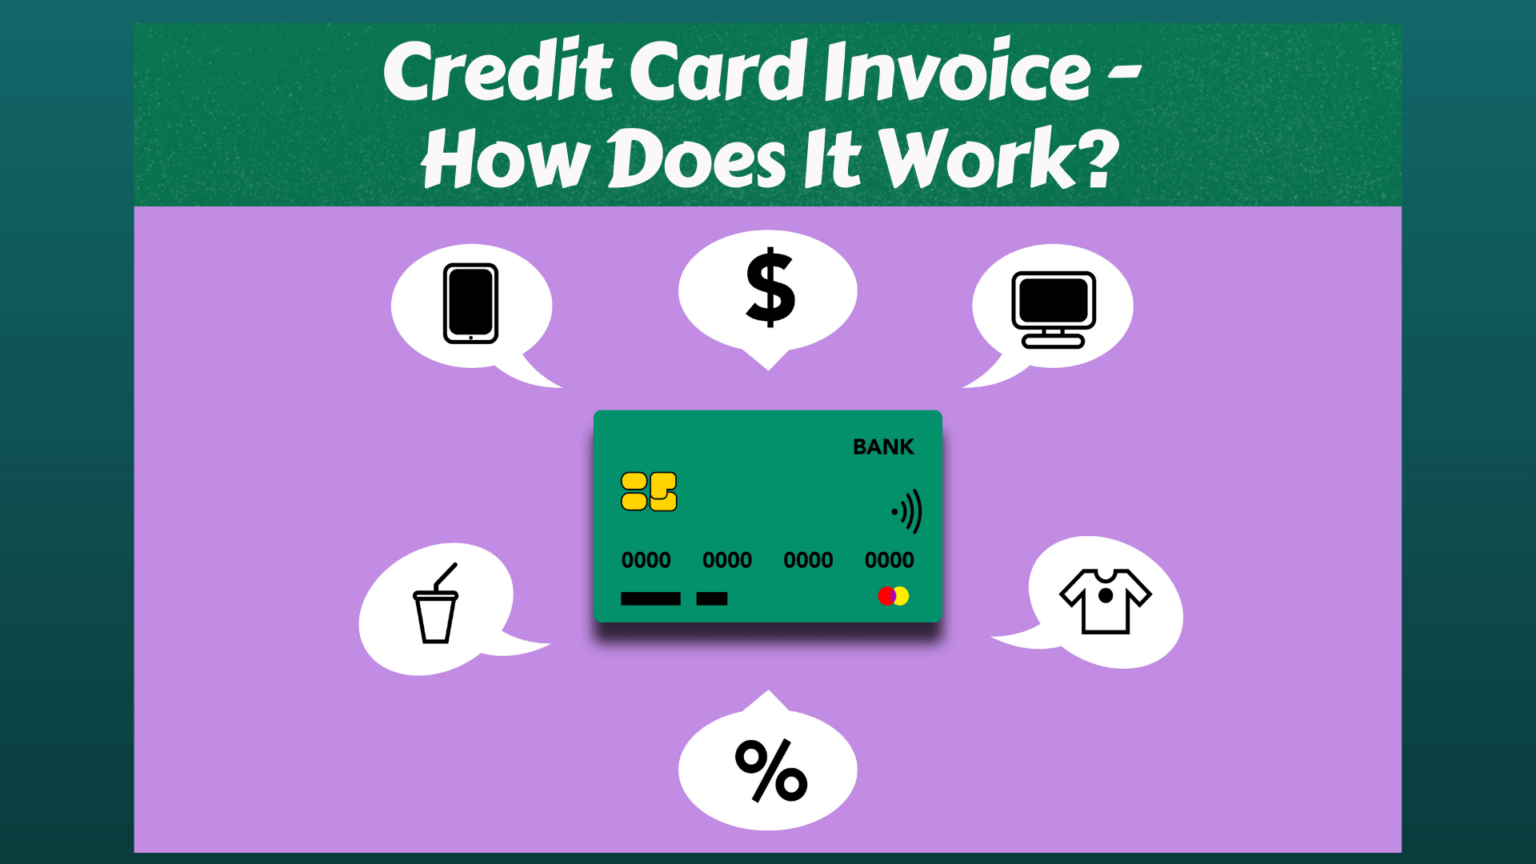 Credit Card Invoice How Does It Work? ReliaBills